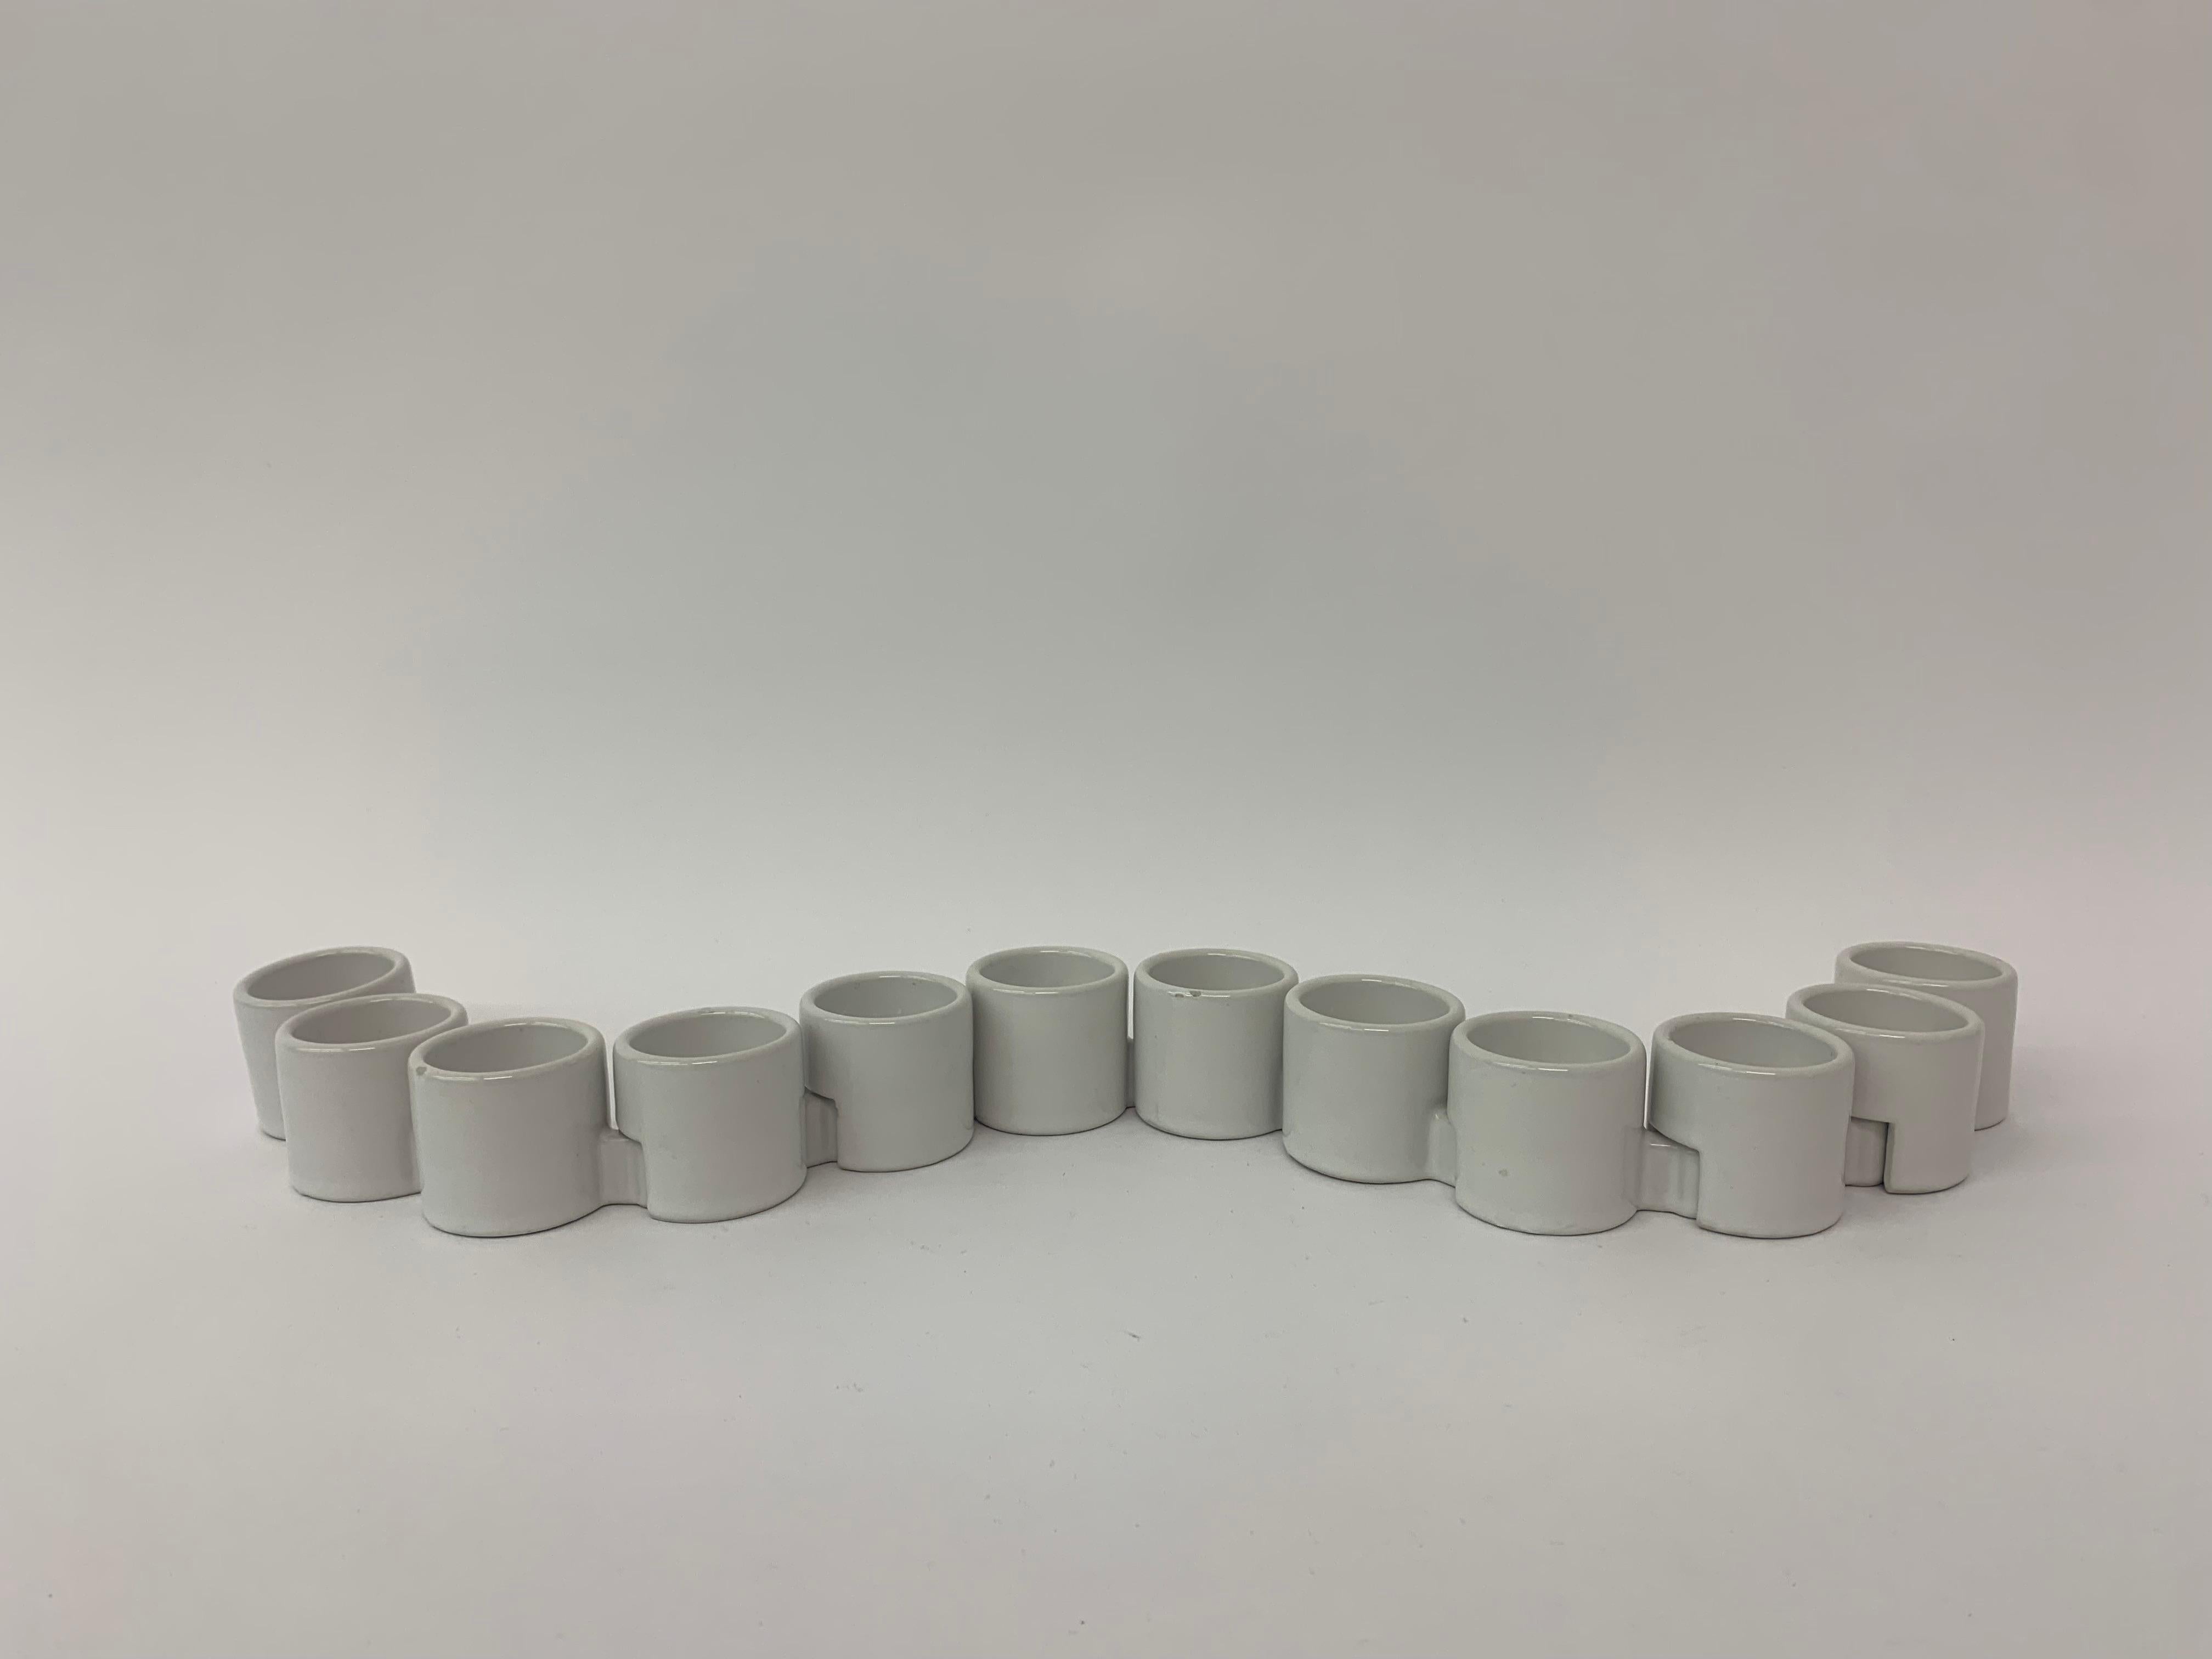 Vintage Ikea Candle Holder by Ehlen Johansson, 1980's For Sale 5